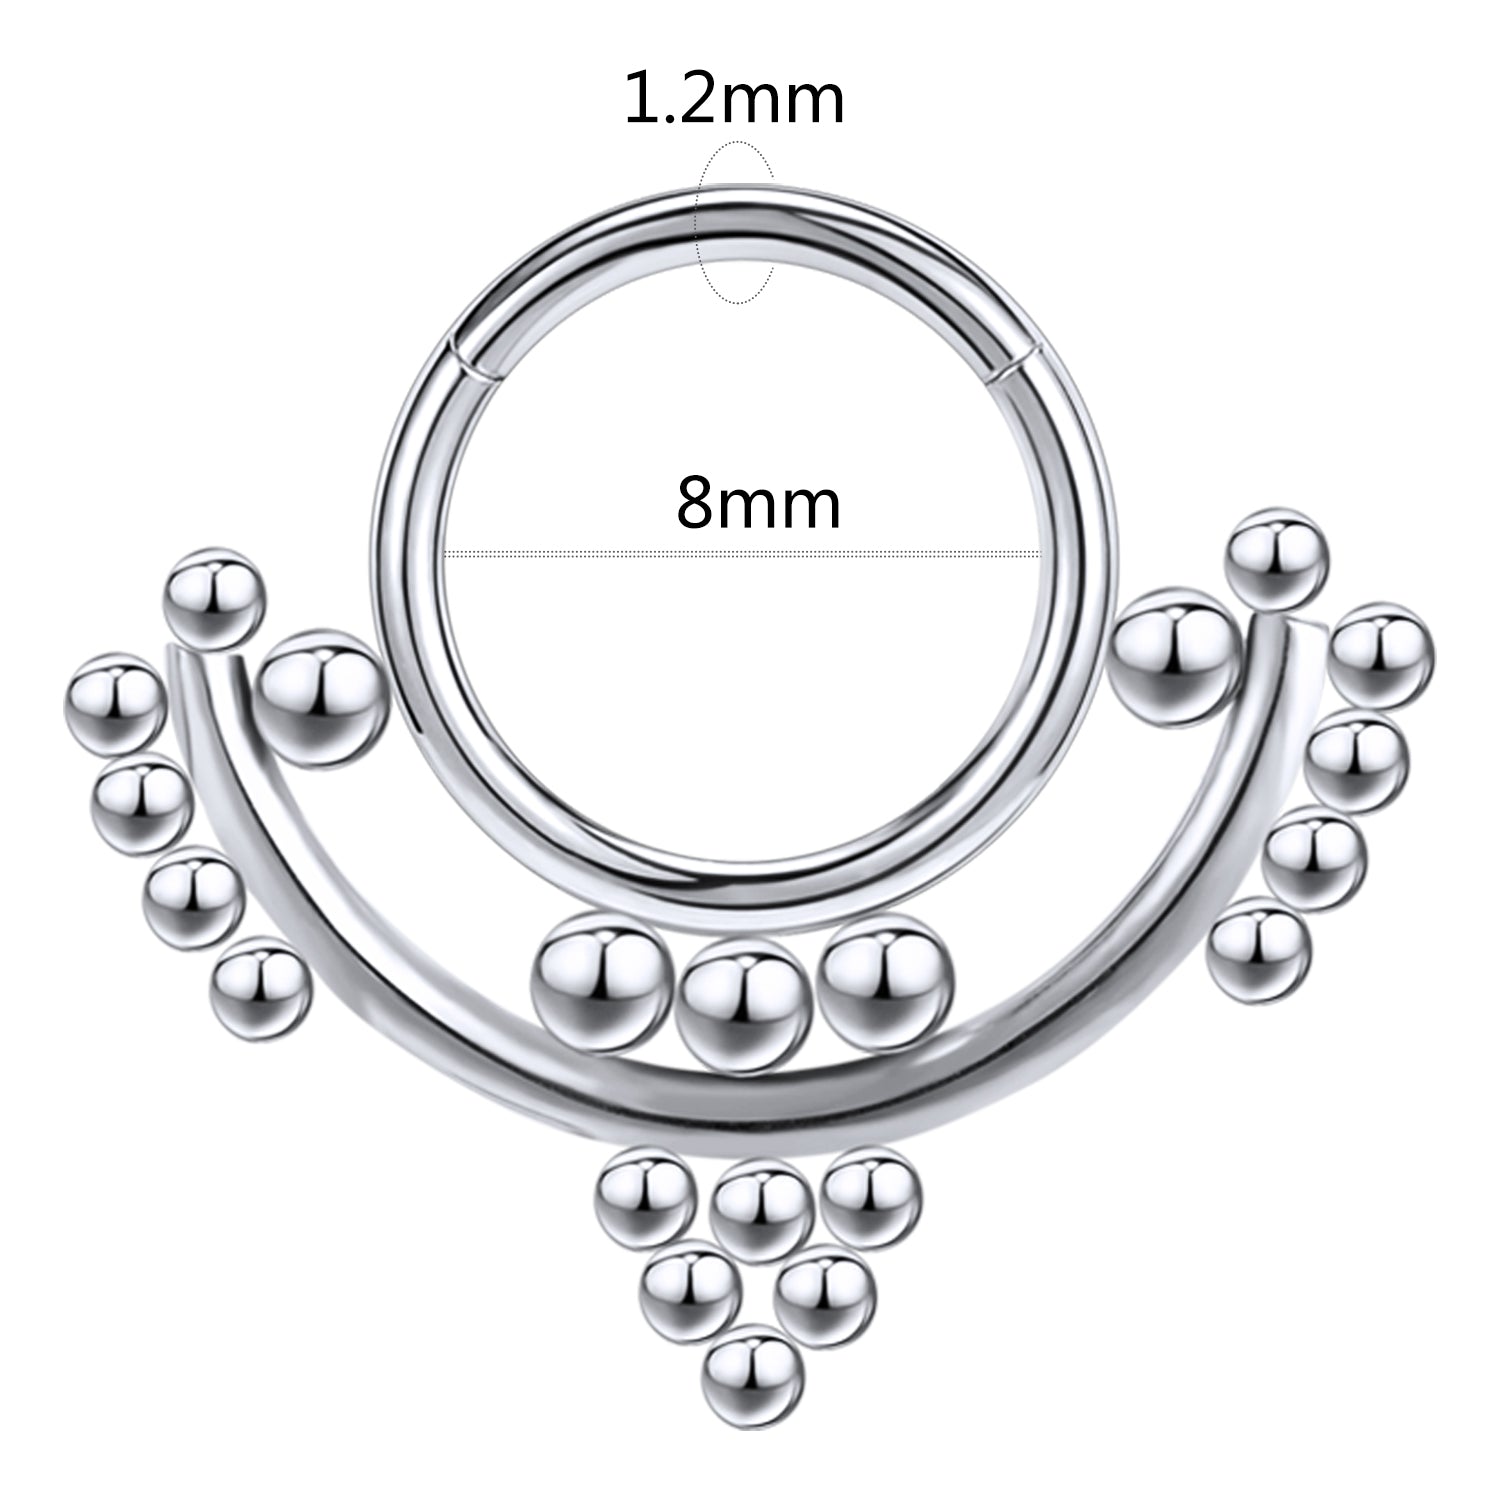 16g-gothic-balls-nose-septum-ring-stainless-steel-clicker-cartilage-helix-piercing